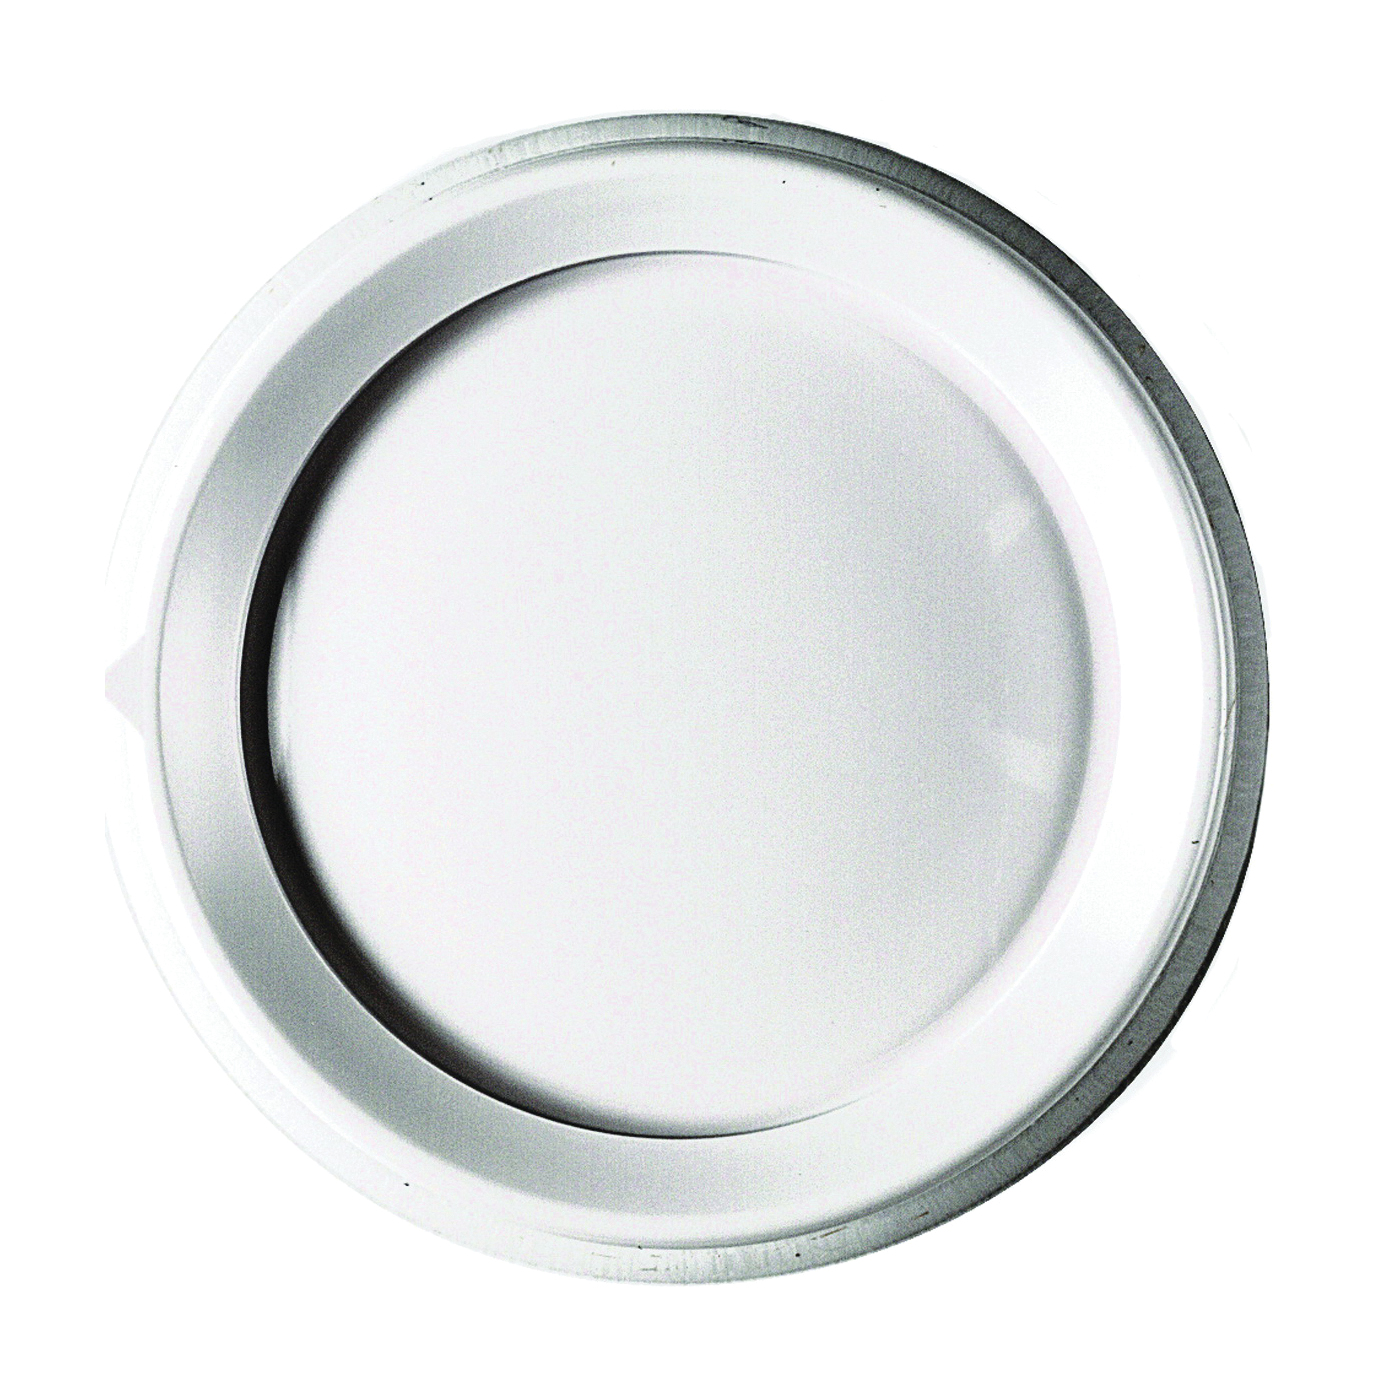 Lutron RK-WH Replacement Rotary Knob, Standard, Plastic, White, Gloss, For: Rotary Push On/Off Dimmer Switches - 1